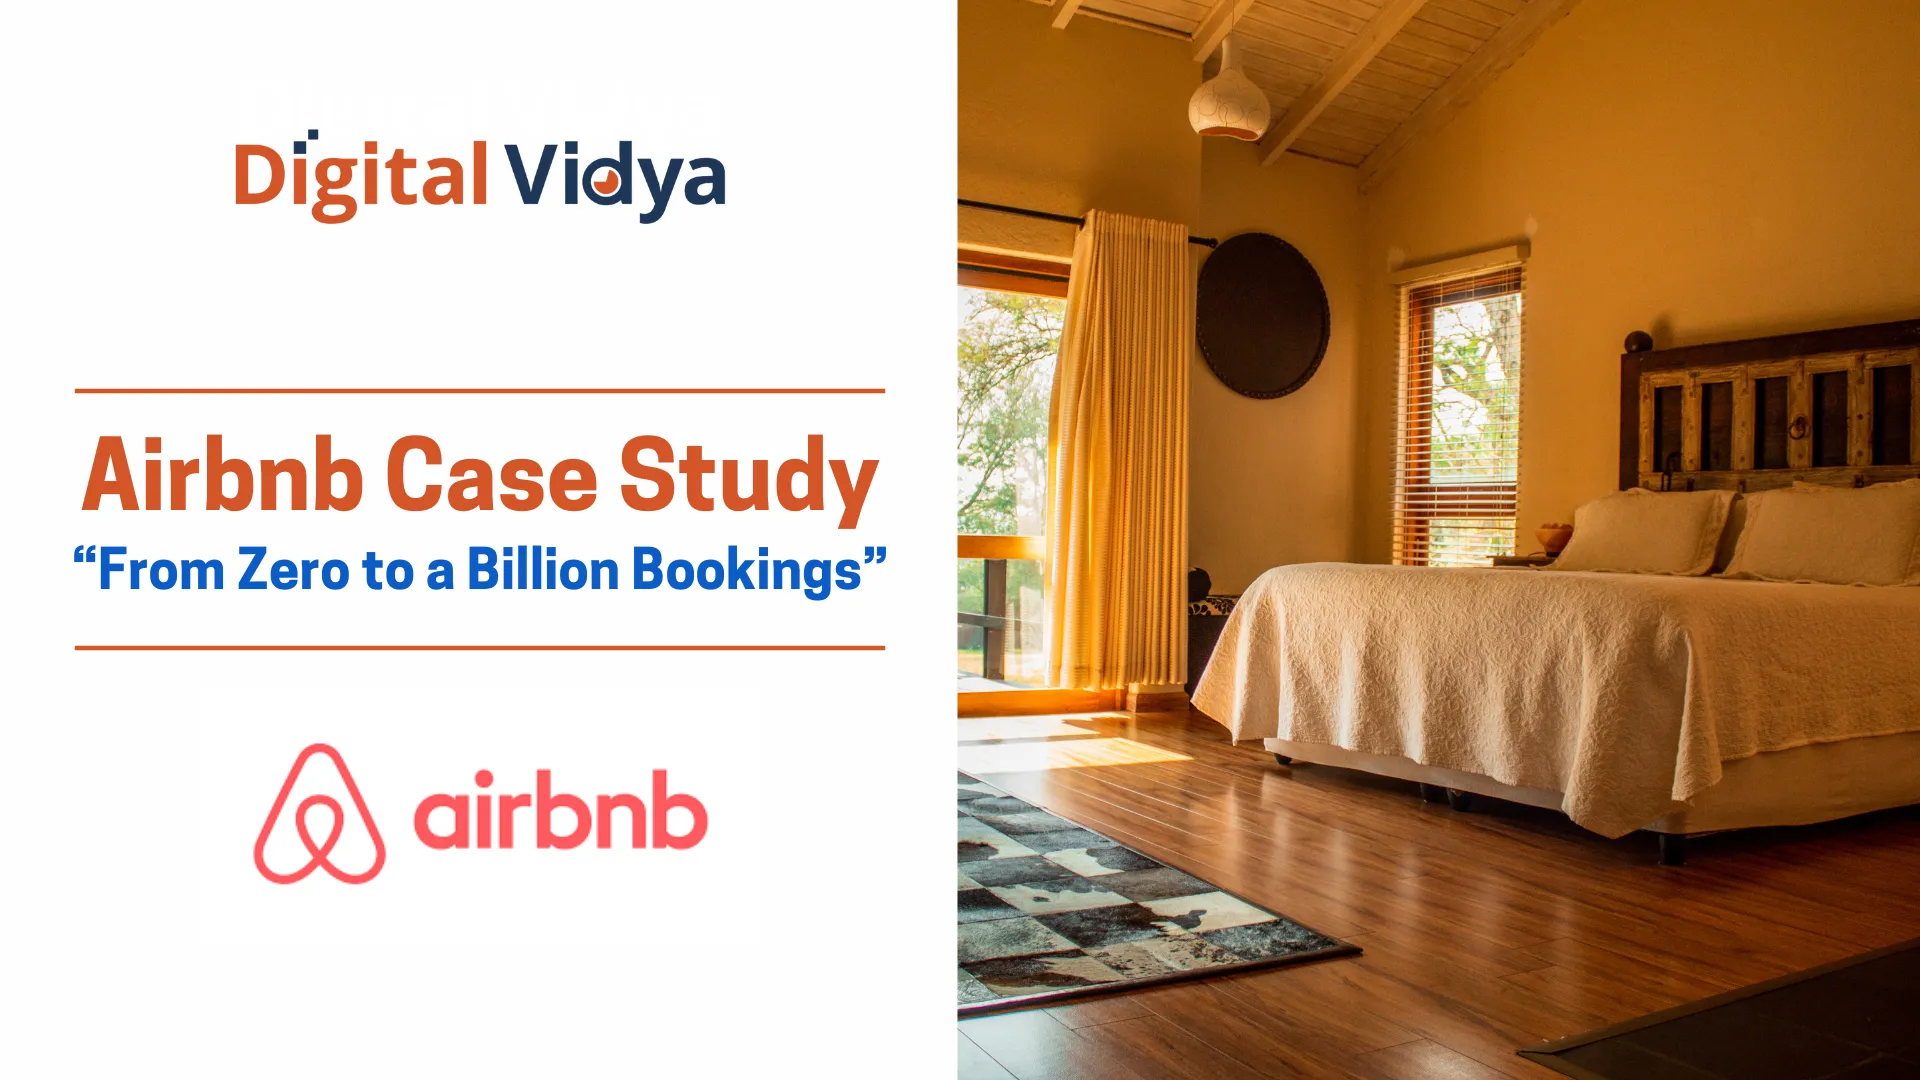 Airbnb case study - from zero to a billion bookings